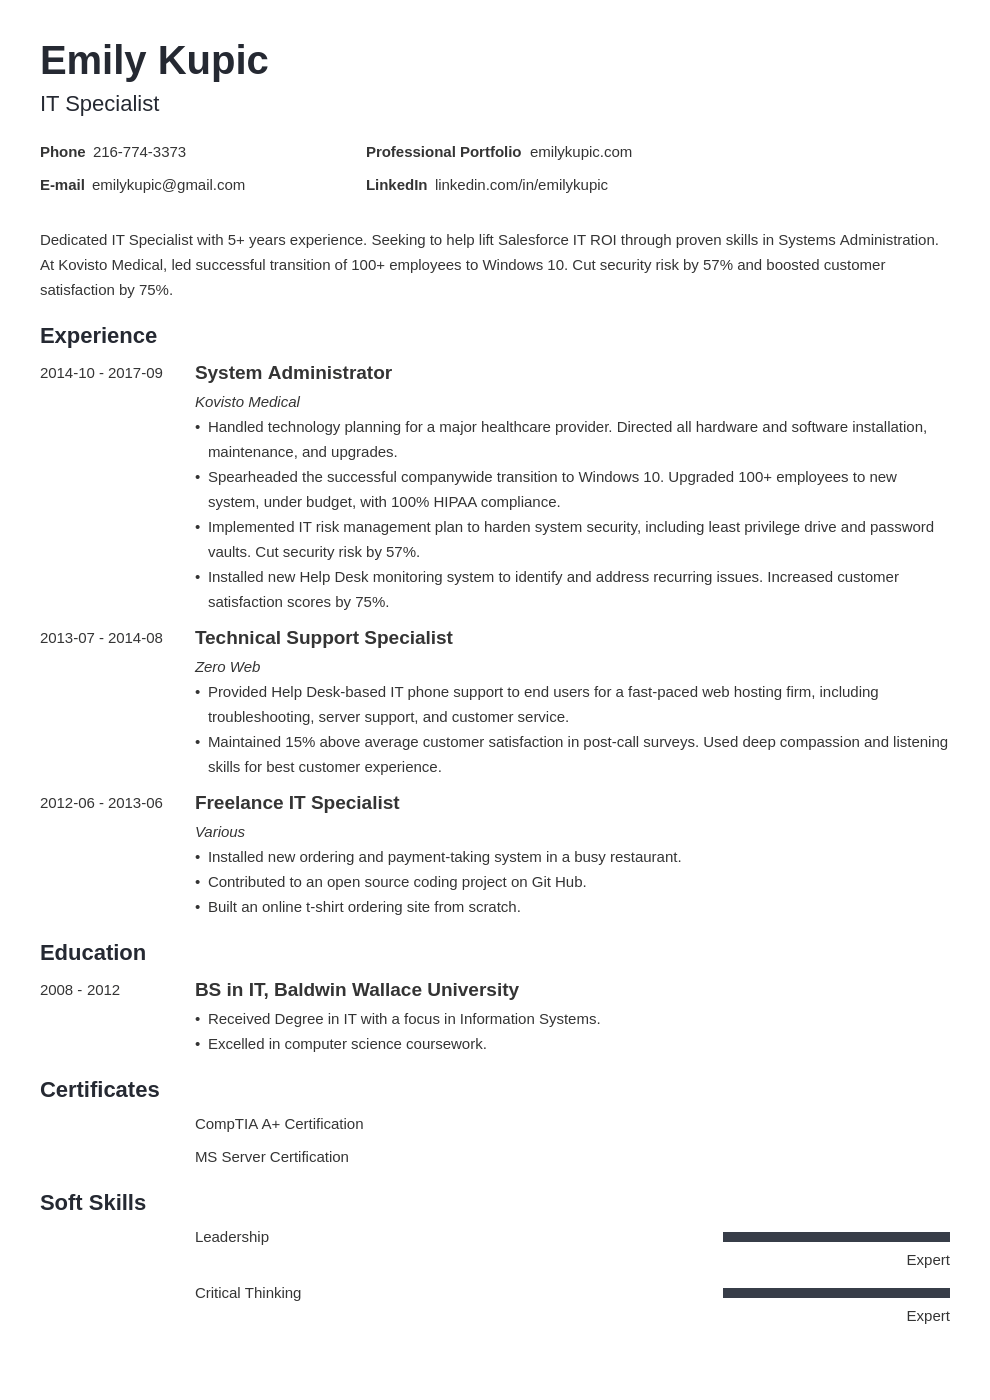 Job Seekers—It's time to git gud and here is your résumé